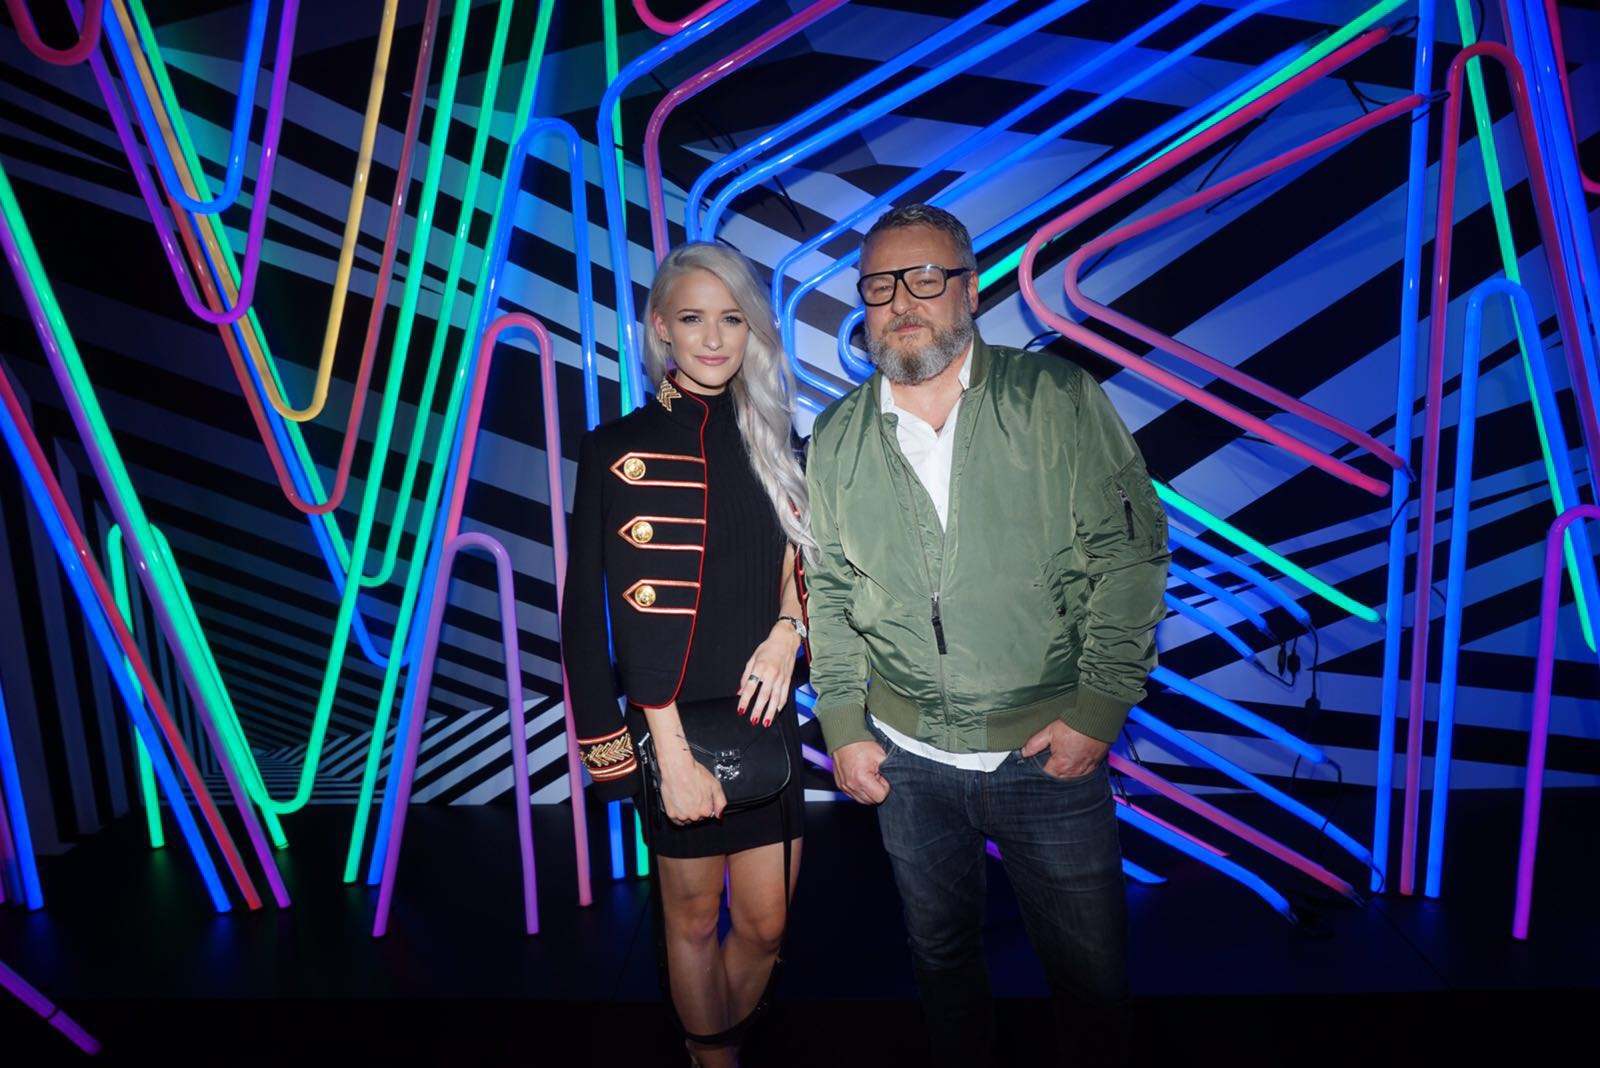 inthefrow and tobias rehberger in hong kong mcm launch party